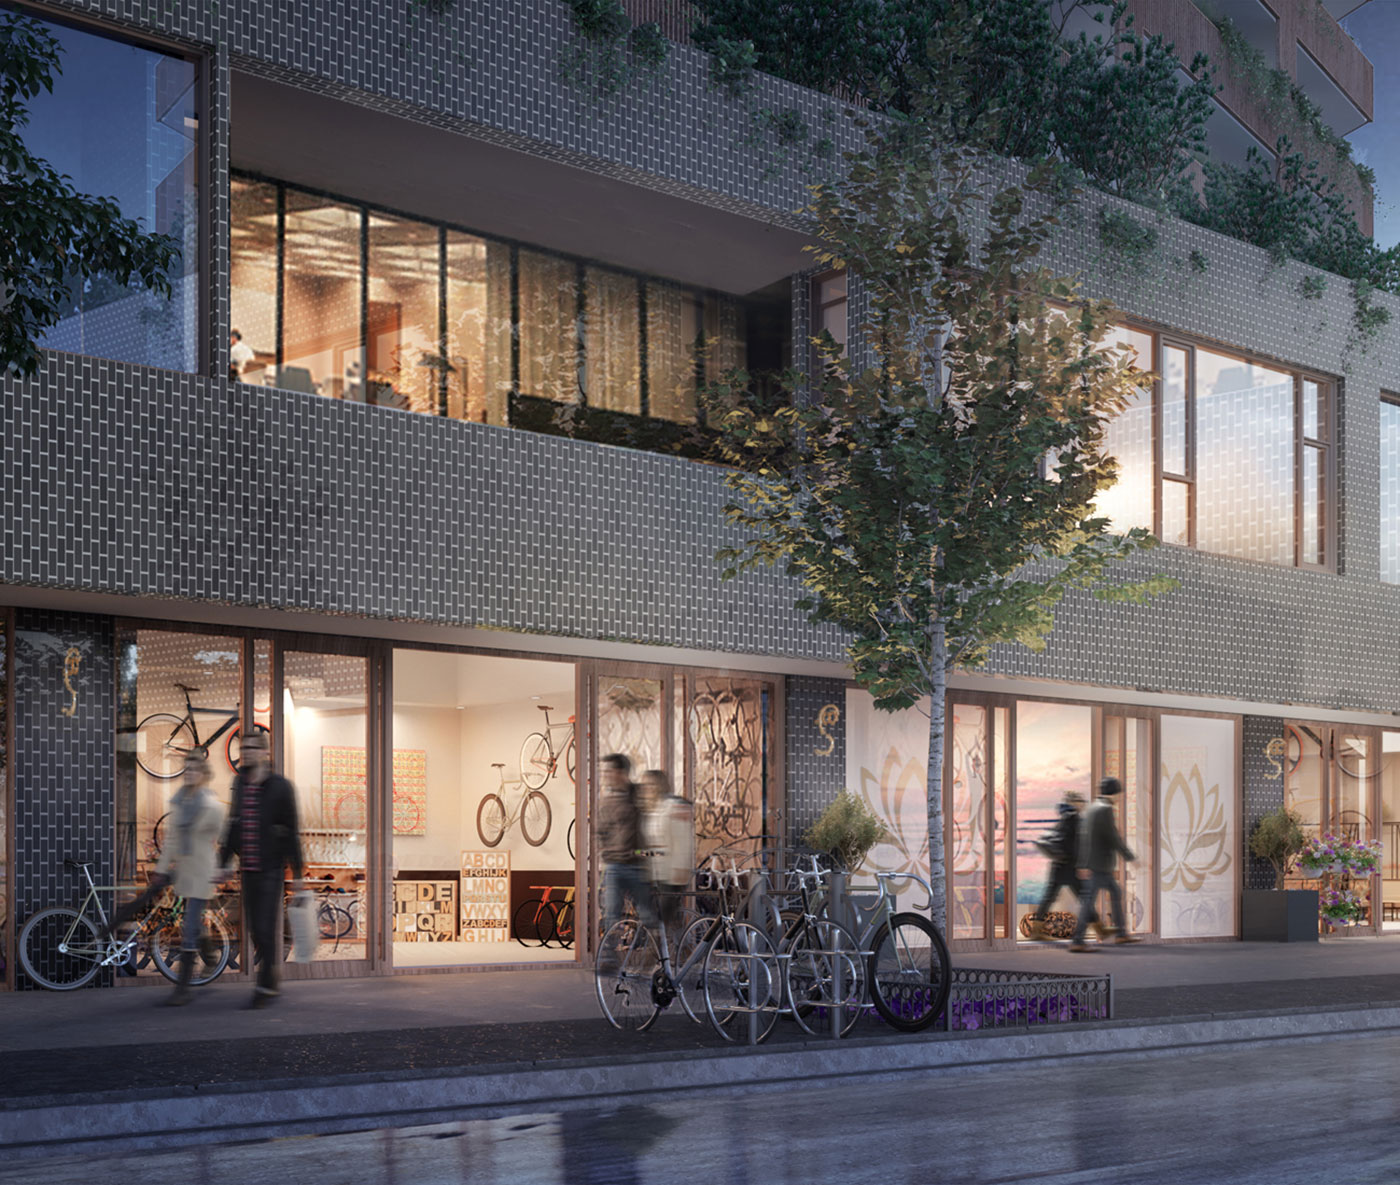 Renderings by Kohn Shnier Architects and SMV Architects